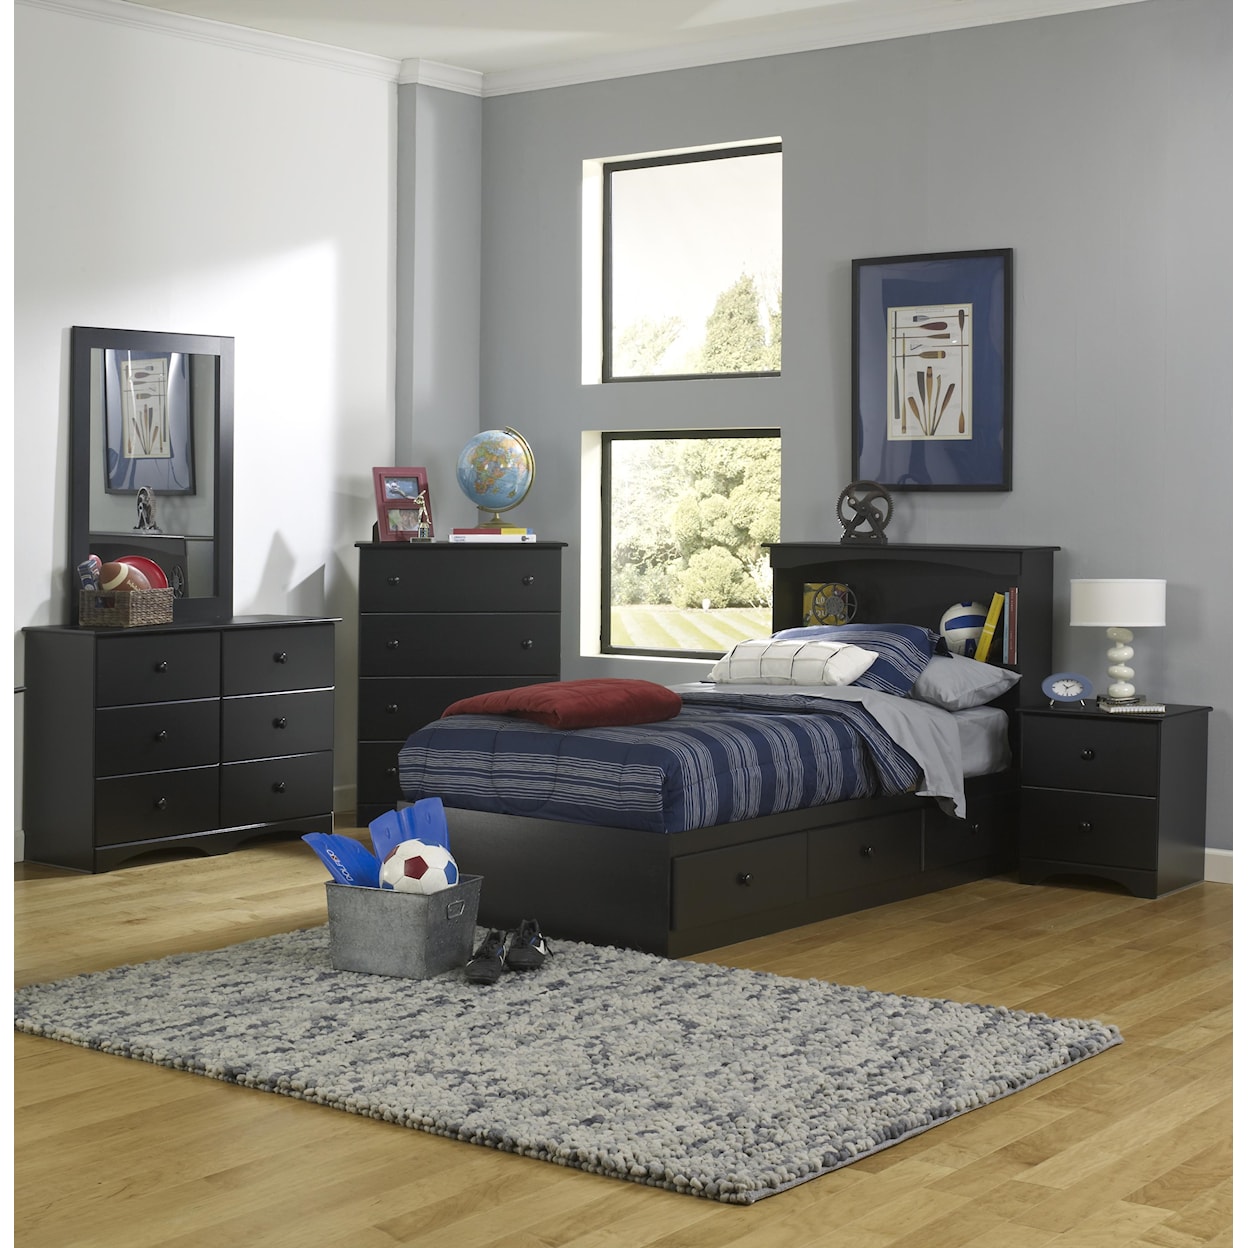 Perdue 5000 Series Twin Bookcase Bed with Storage Package